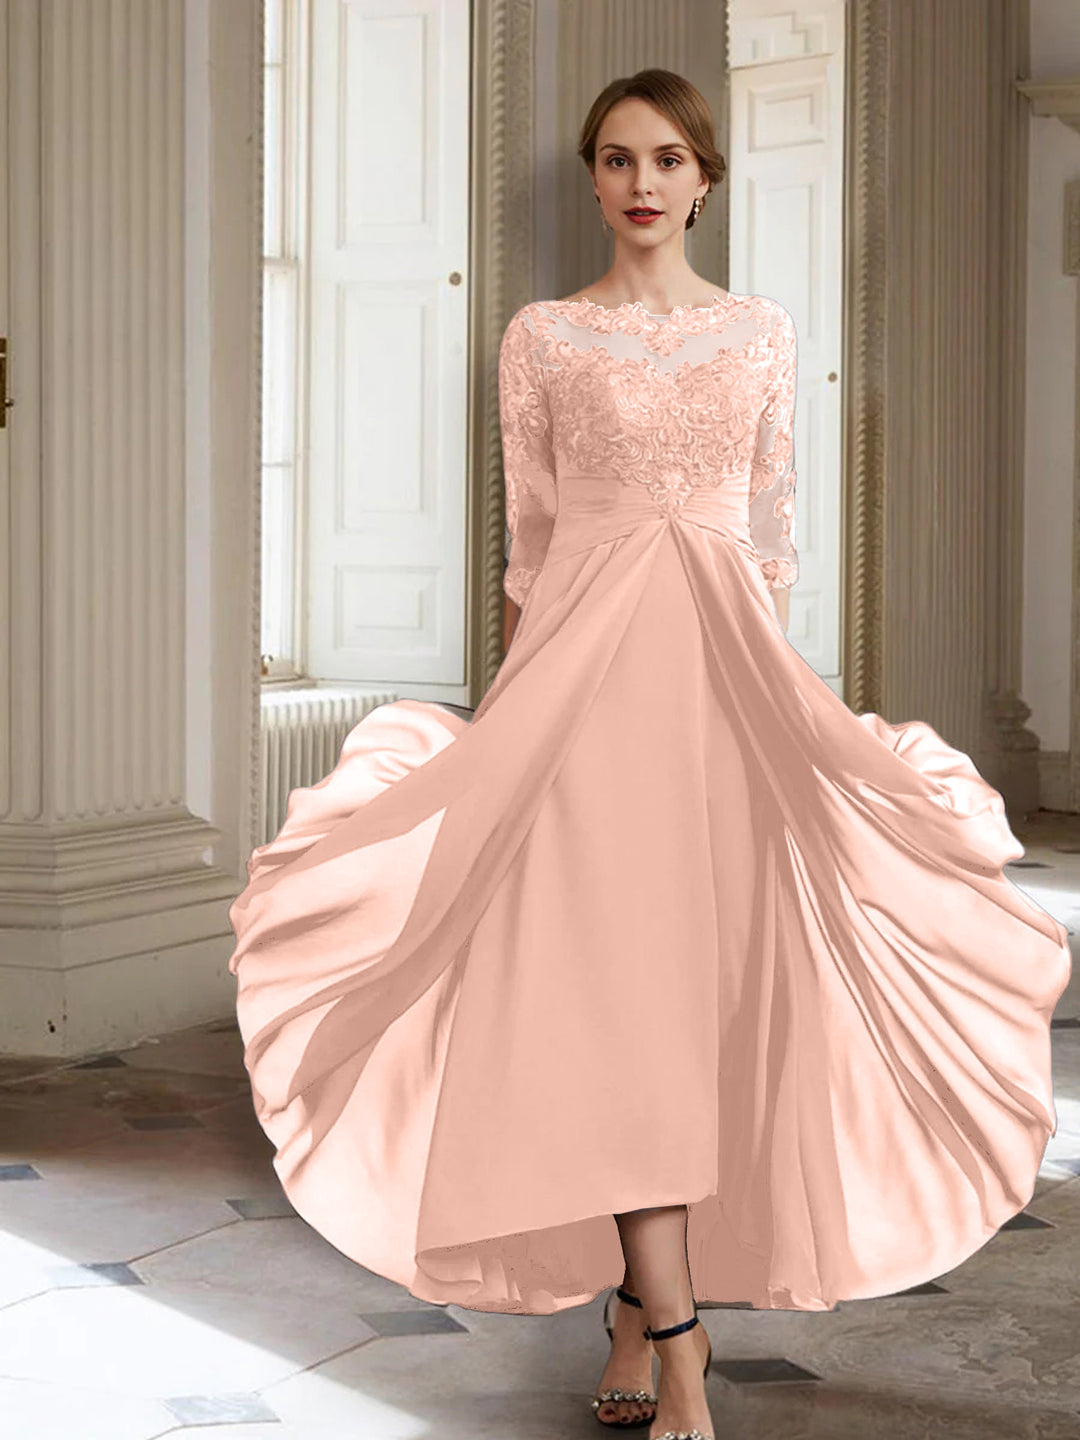 A-Line/Princess Long Sleeves Mother of the Bride Dresses with Applique